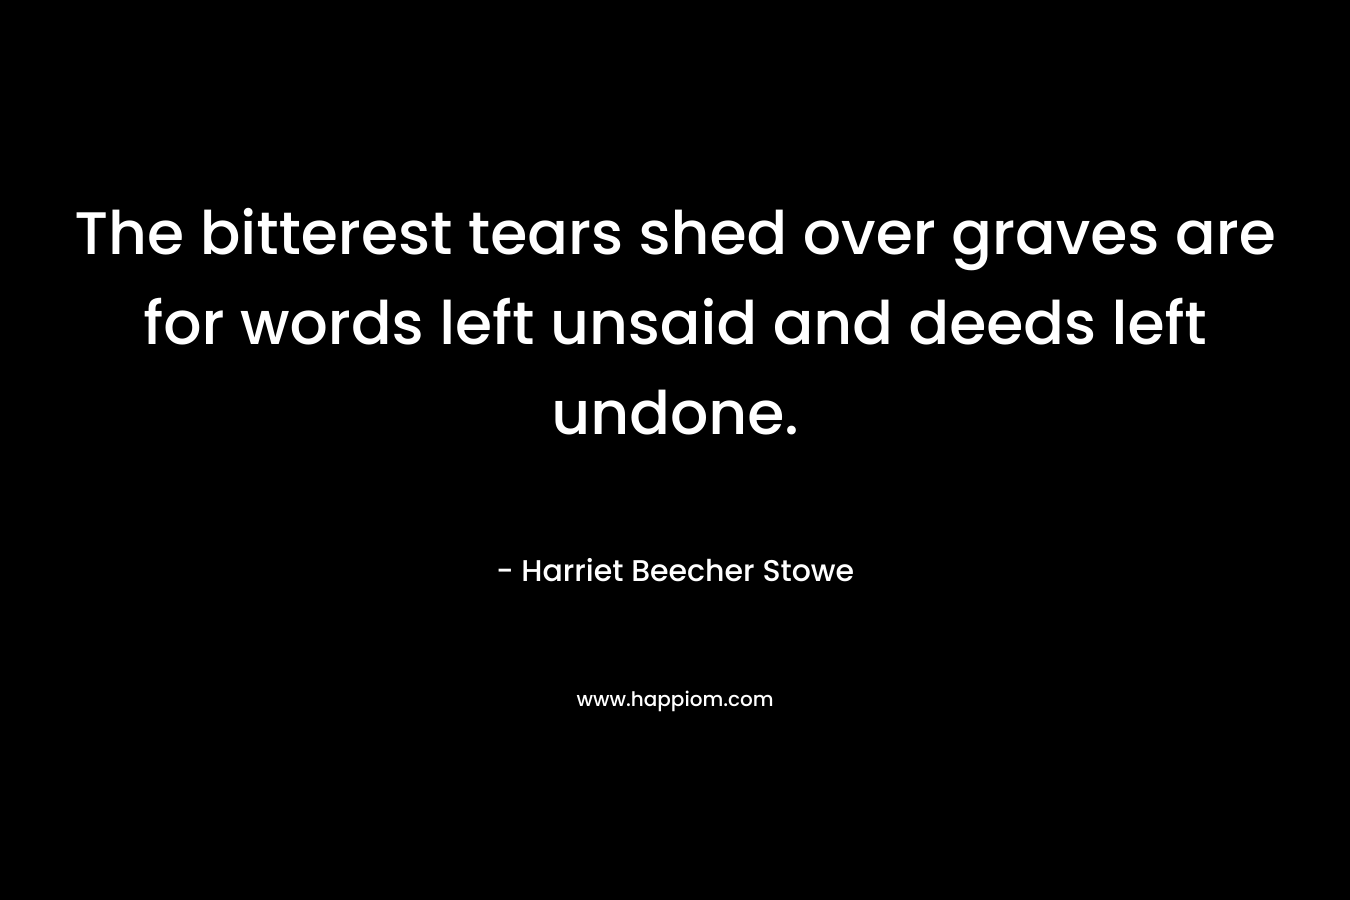 The bitterest tears shed over graves are for words left unsaid and deeds left undone. – Harriet Beecher Stowe